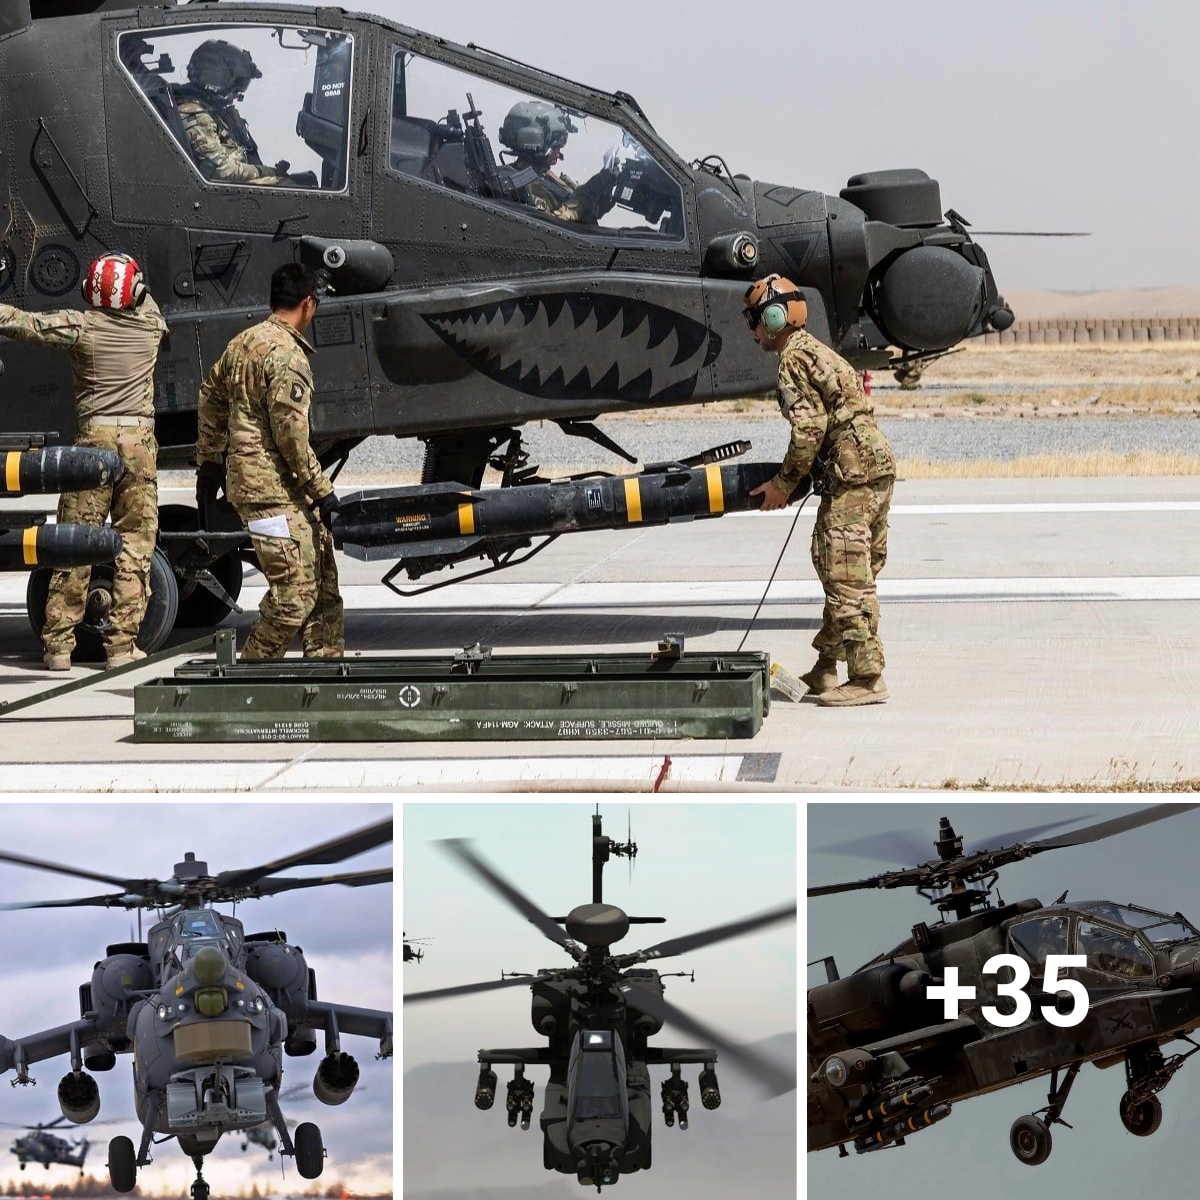 It’s unbelievable how much $930 million was spent on Apache helicopters and weapons.